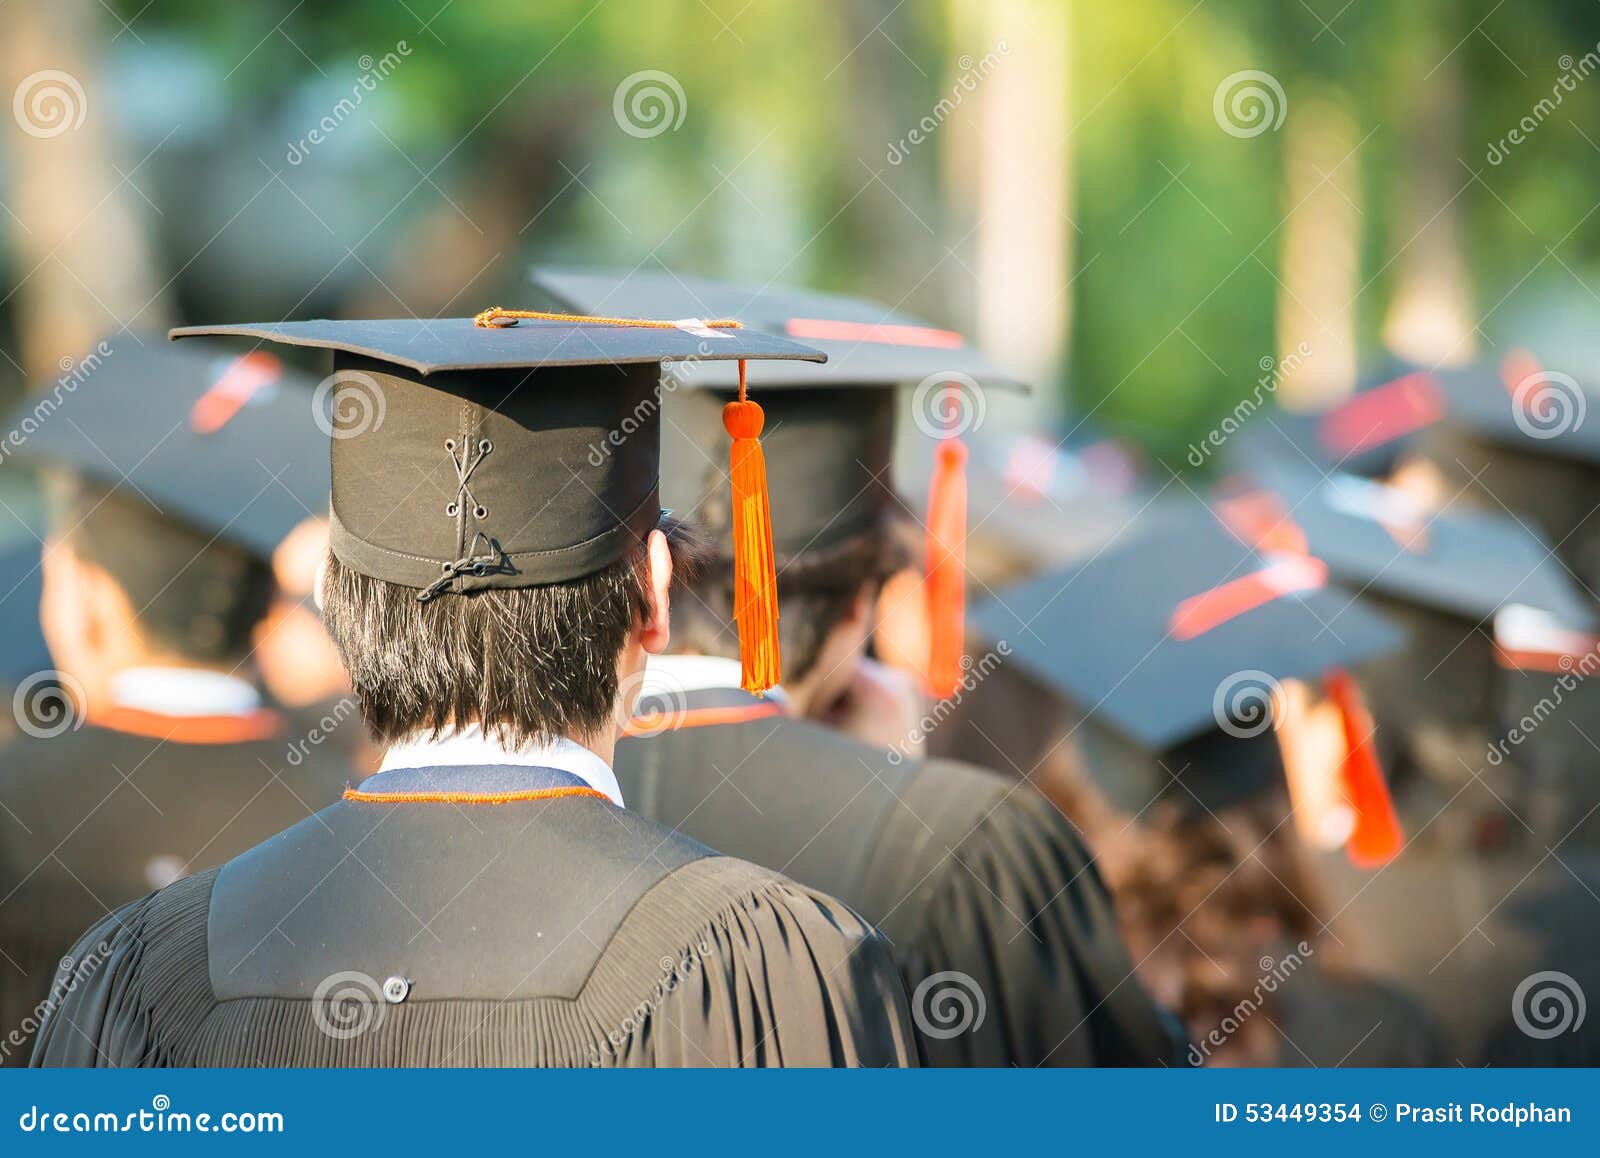 back of graduates during commencement